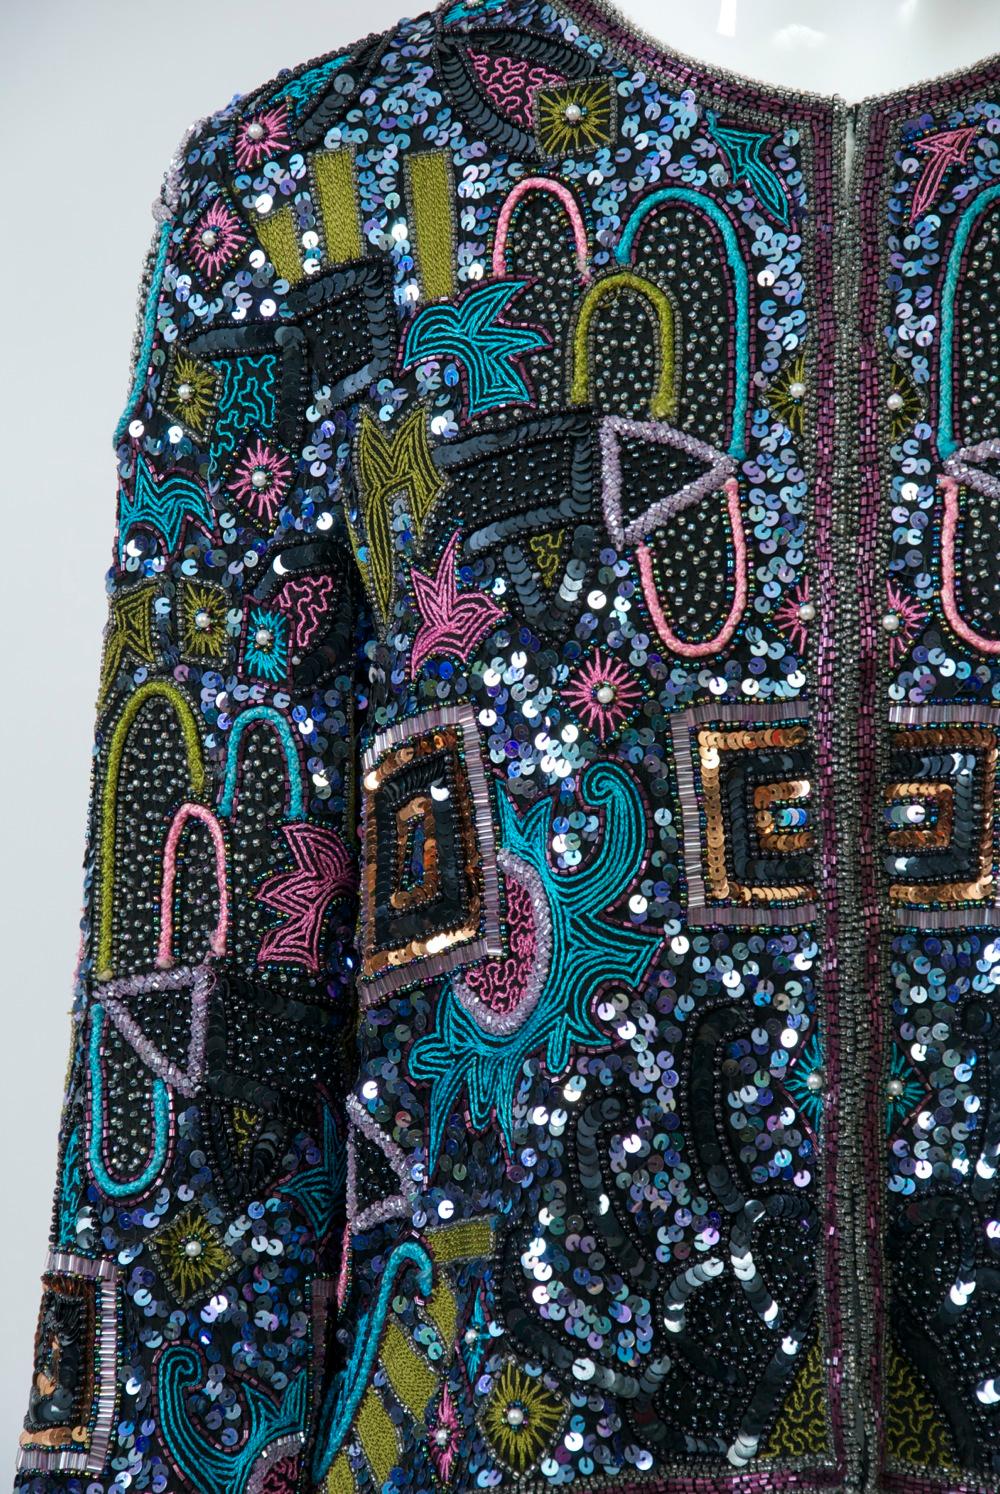 A profusion of multicolored beads and sequins adorns the surface of this eye-catching evening jacket.  The mostly pastel beads cover the entire black silk surface in a riotous pattern predominated by narrow arcs and interpersed with some floral and